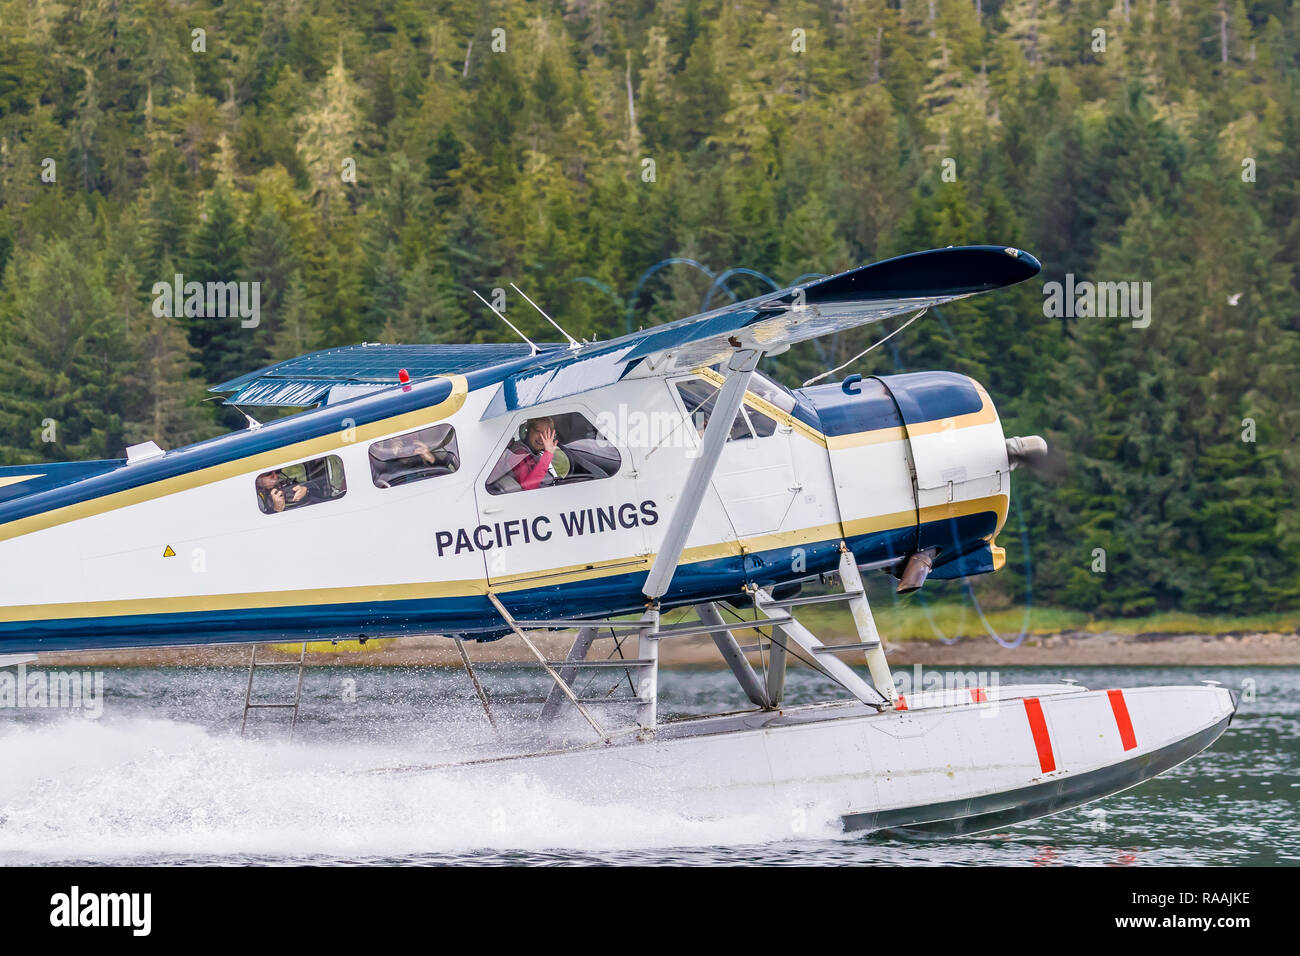 A sightseeing plane takes off in Petersburg, Southeast Alaska, USA. Stock Photo